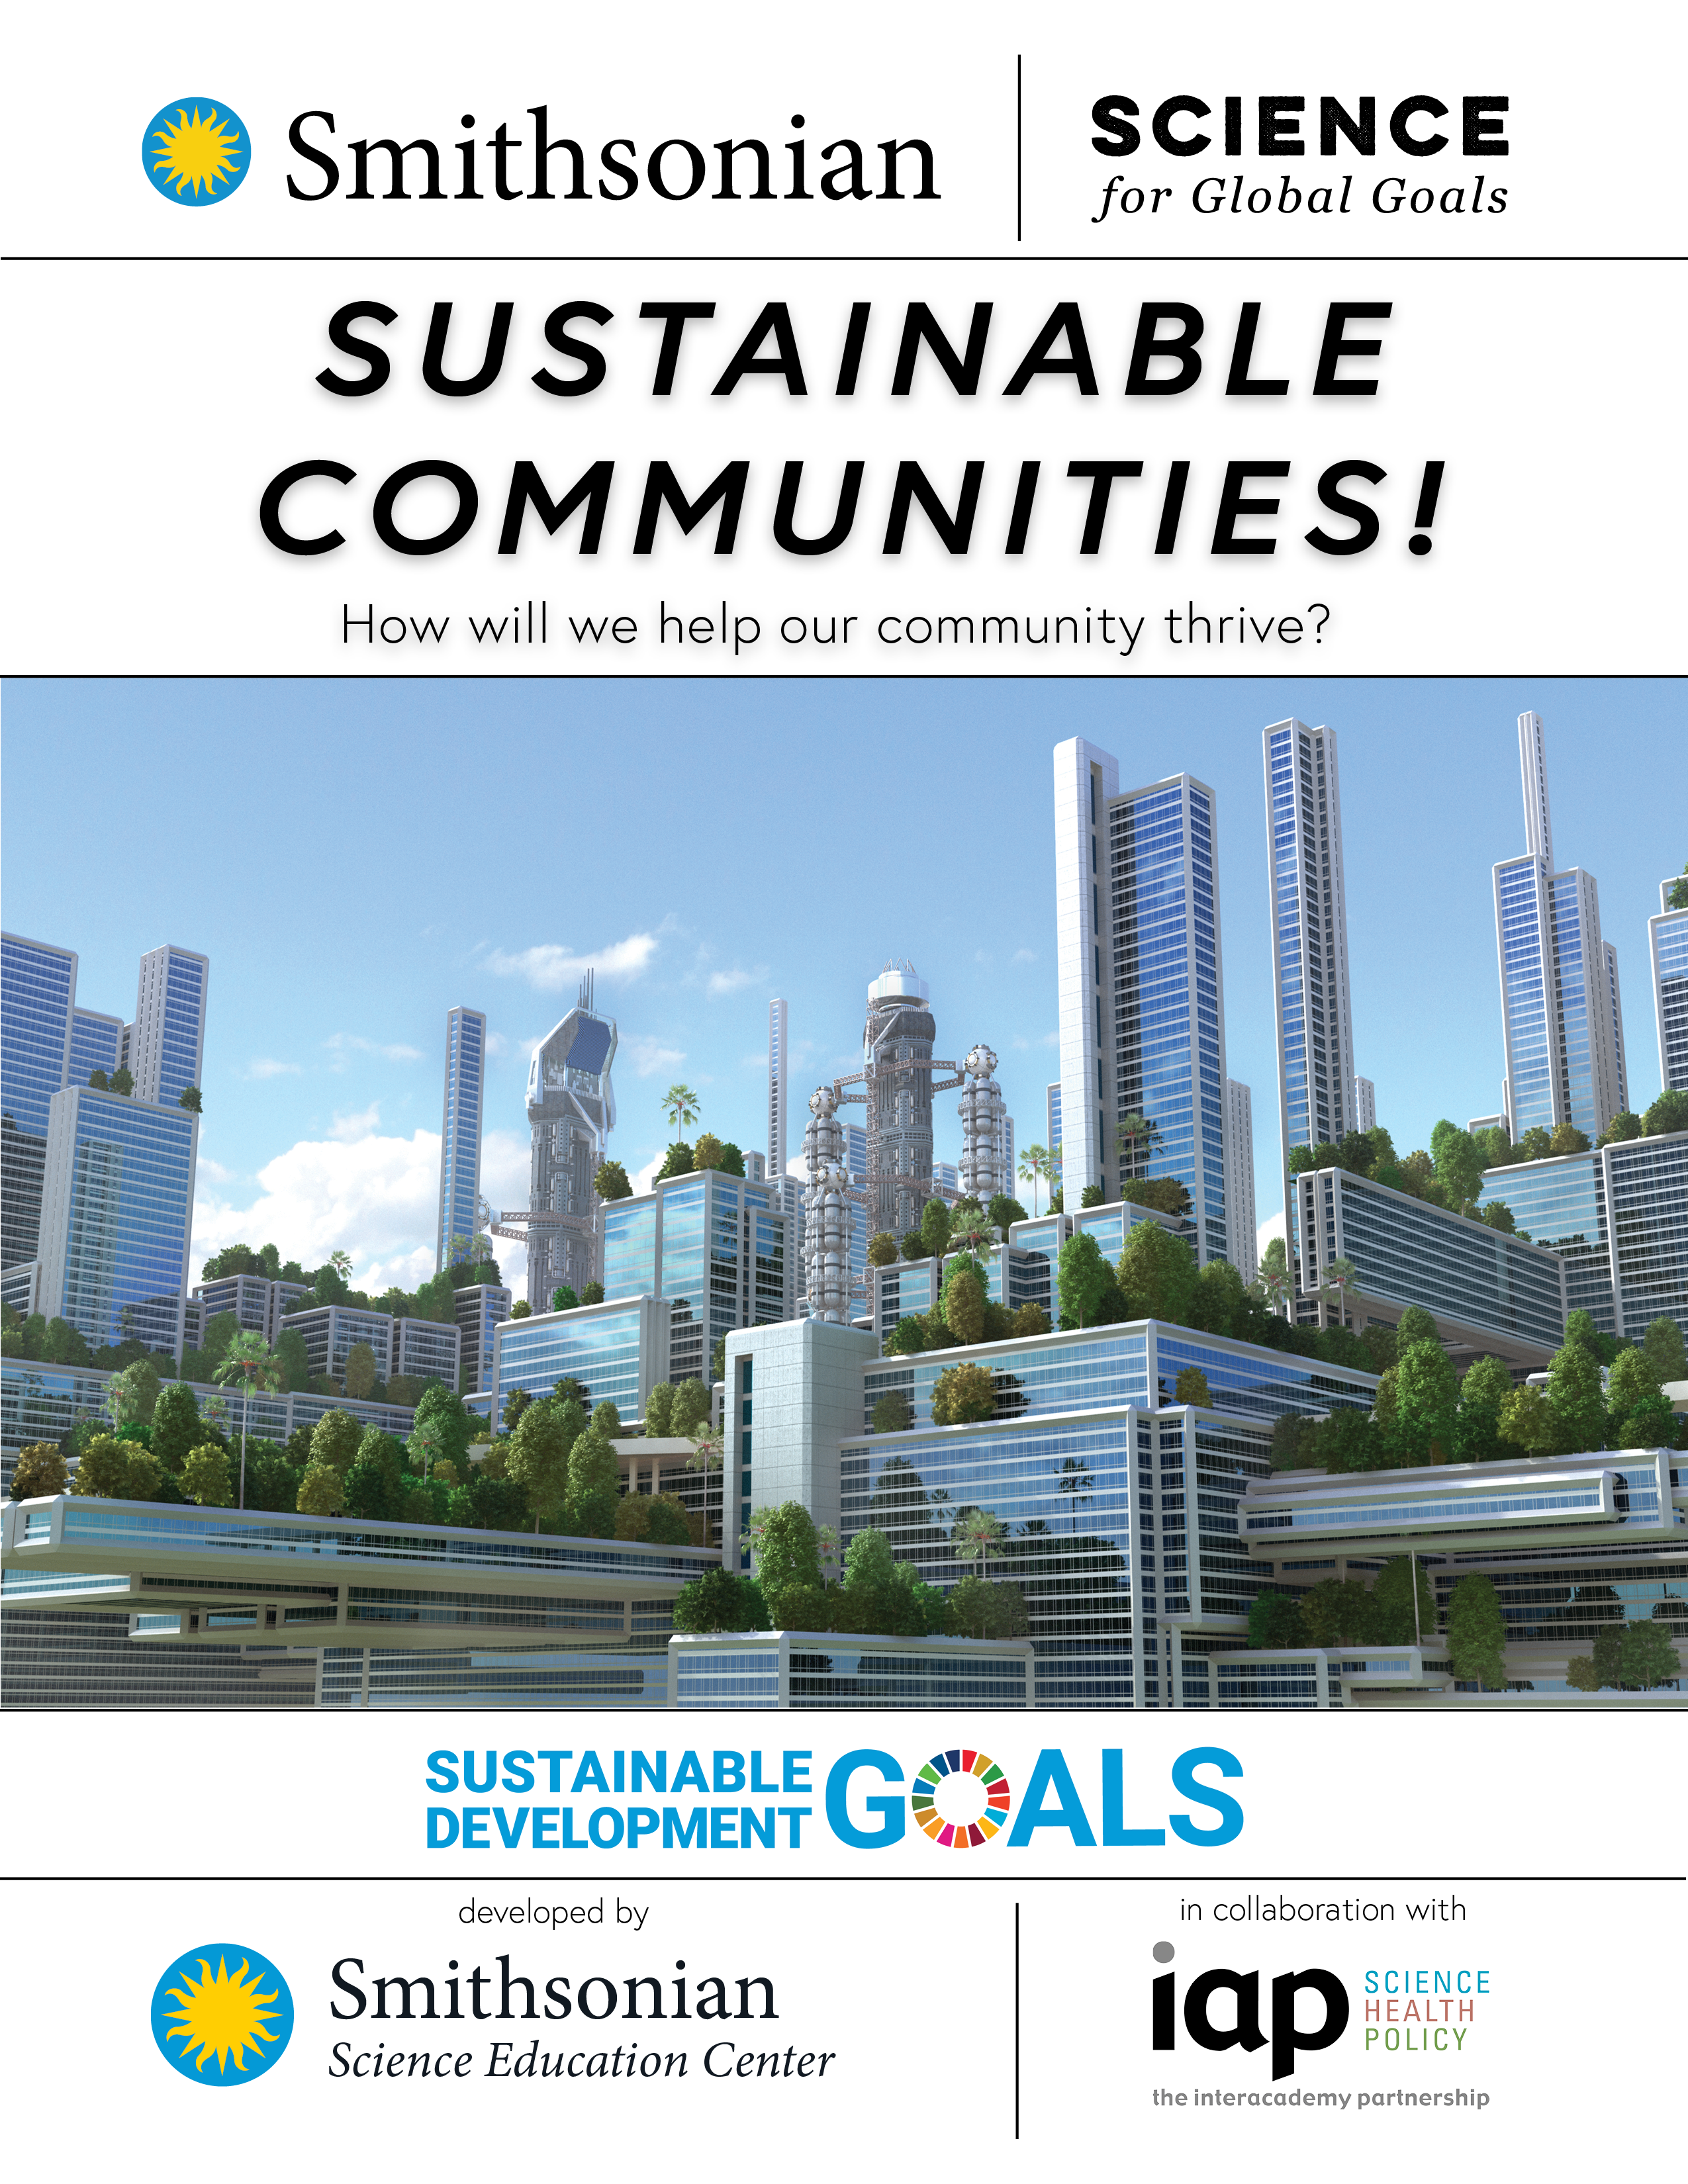 Getting Started for Sustainable Communities